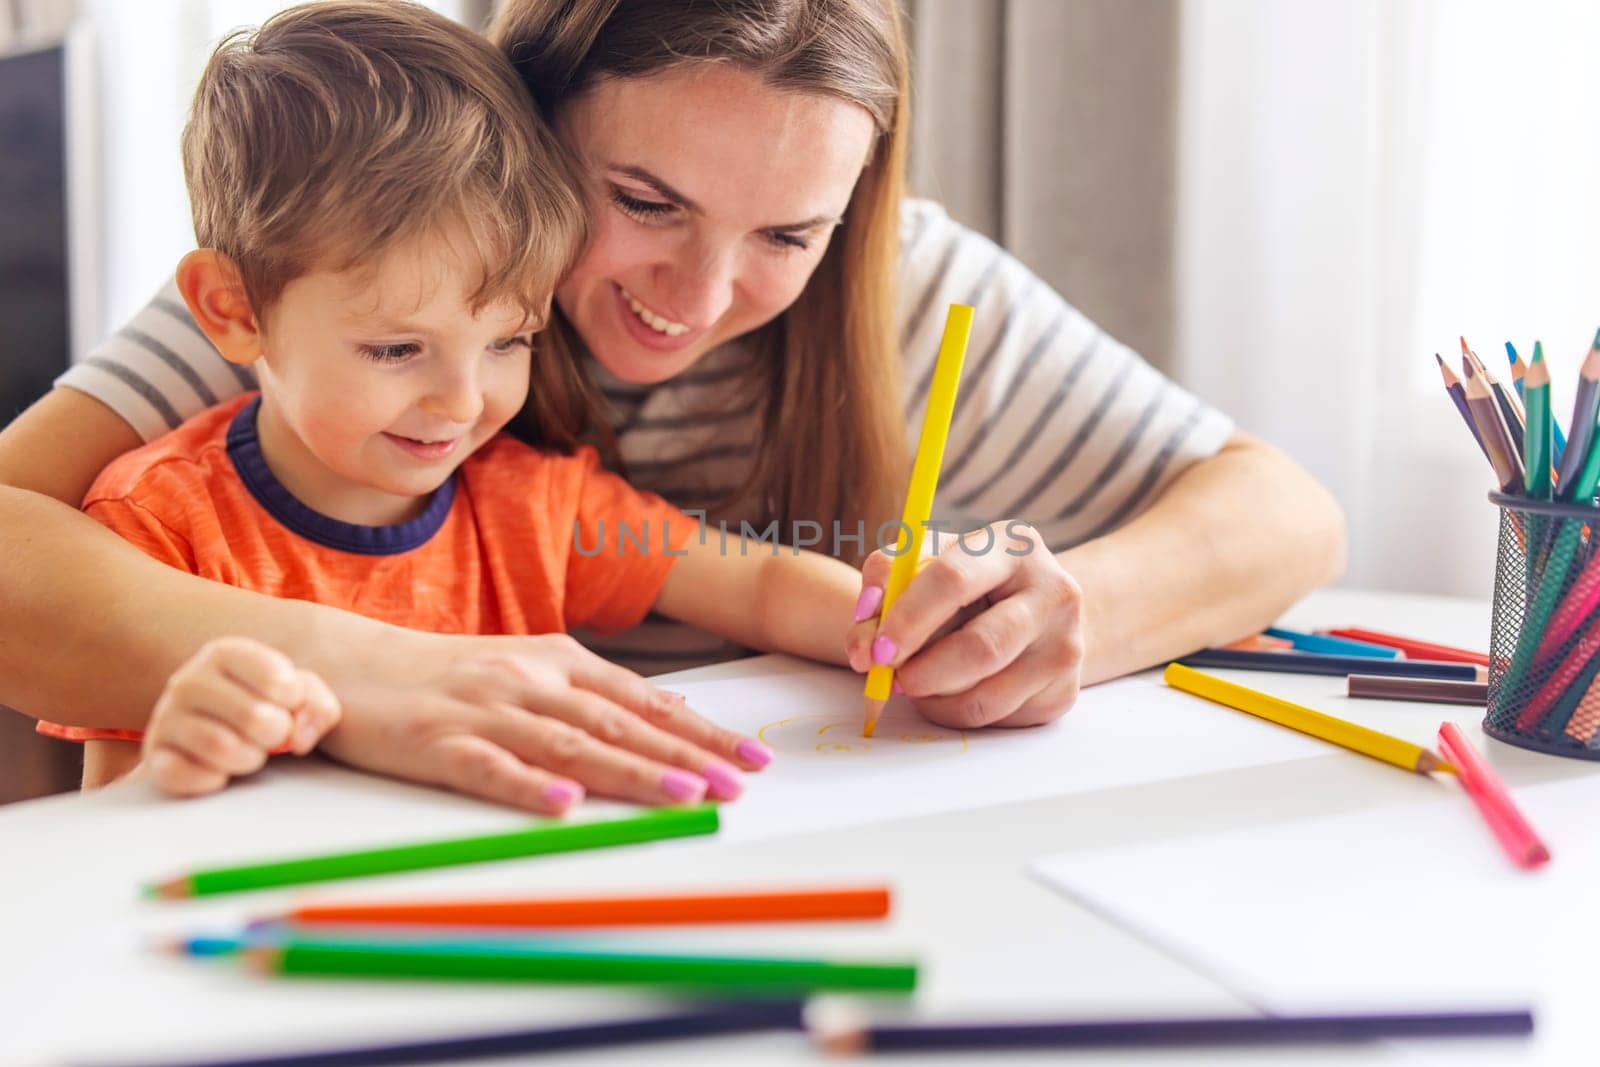 Mother and Son Enjoying Creative Time with Pencils by andreyz